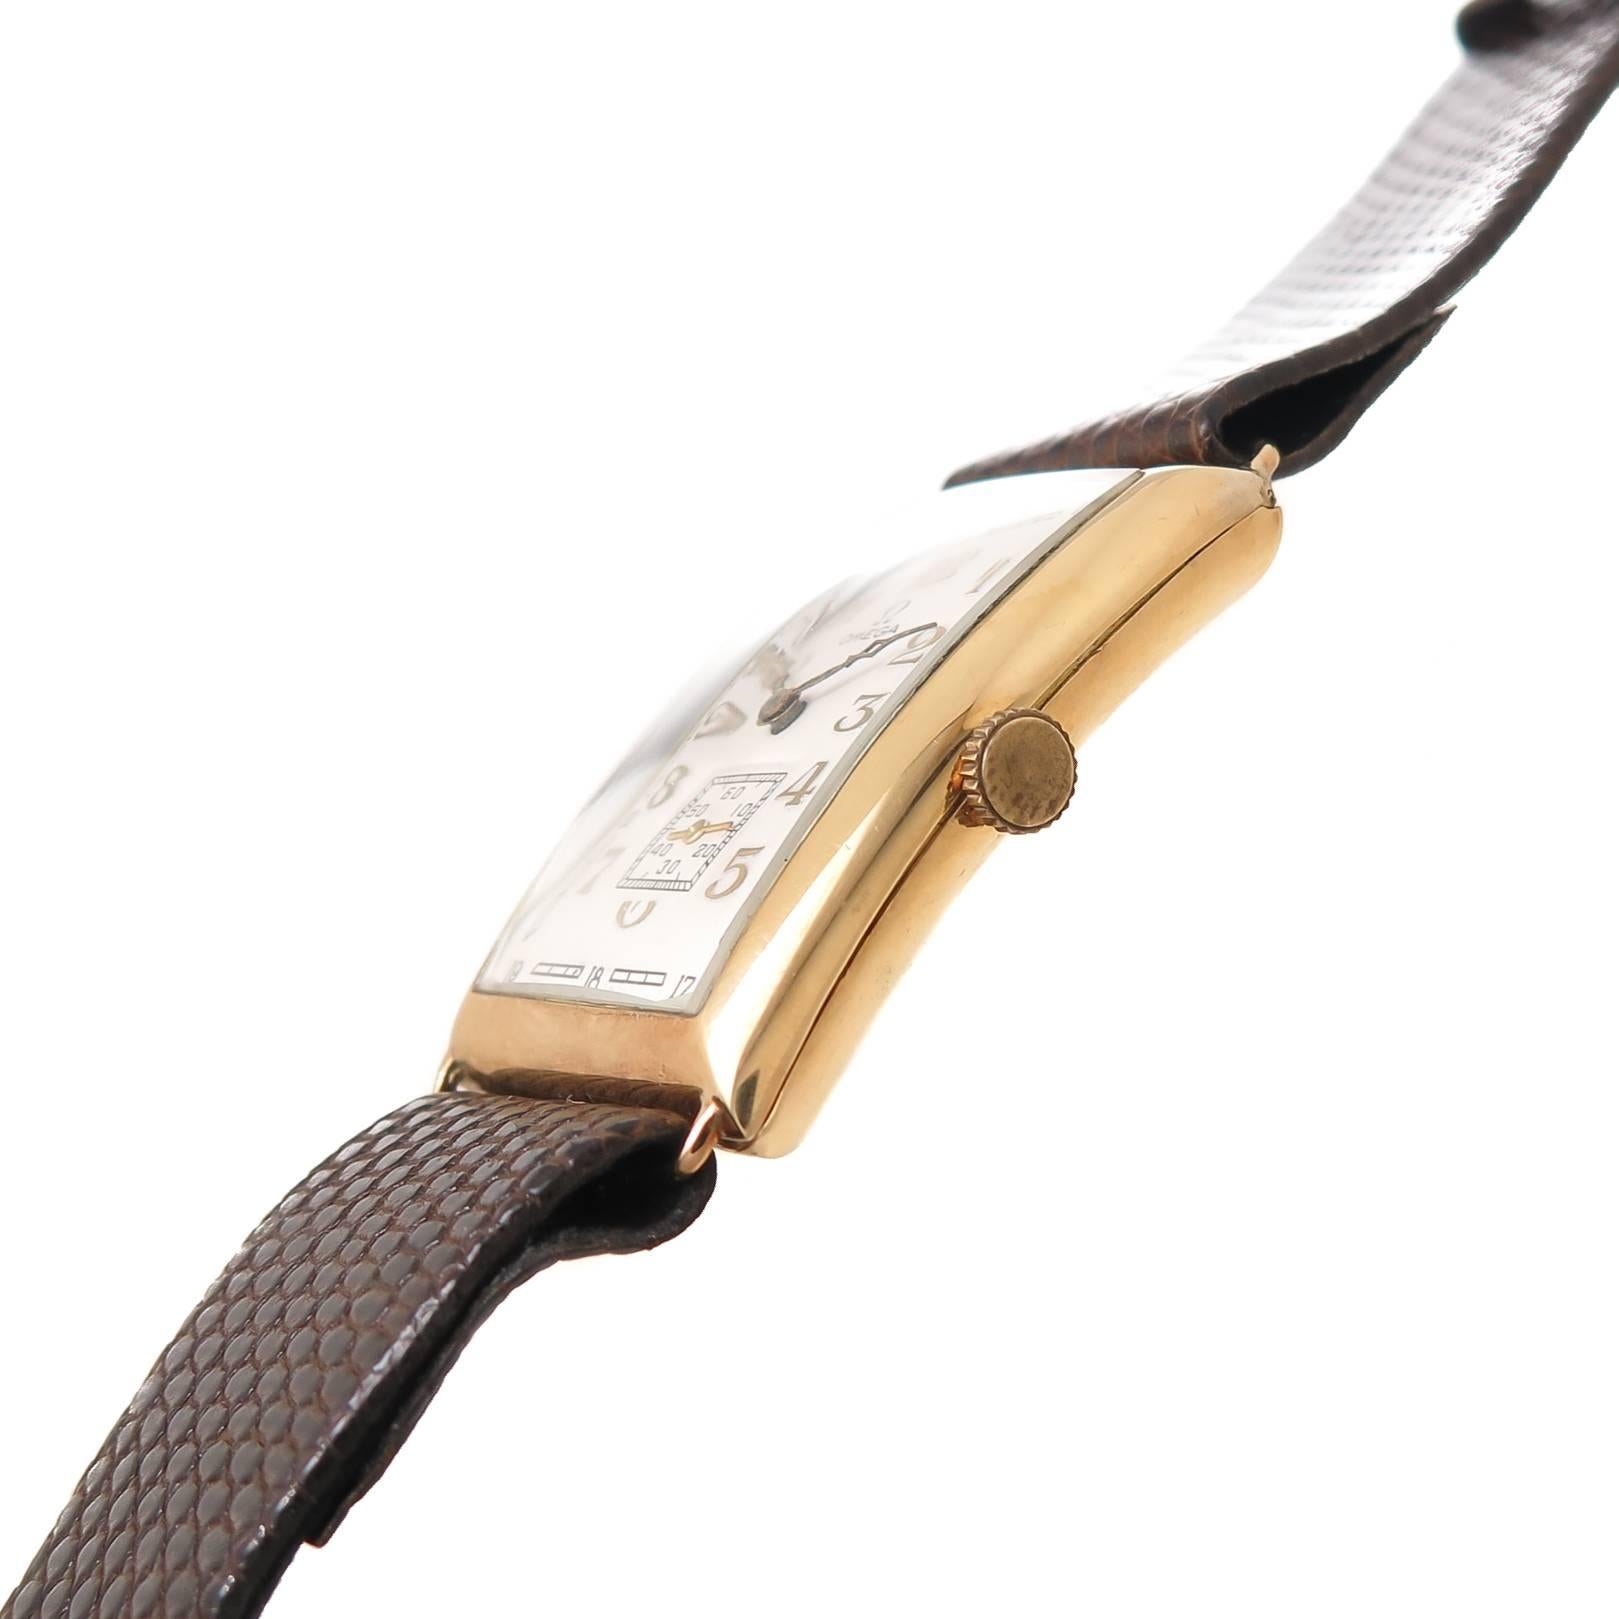 Circa 1930 Omega oversize Wrist watch, 18K yellow Gold signed Omega case with a slight curve measuring 35 X 26 MM. Mechanical, manual wind 17 Jewel movement, original white dial with raised gold markers. Hirsch Brown Lizard strap, total watch length